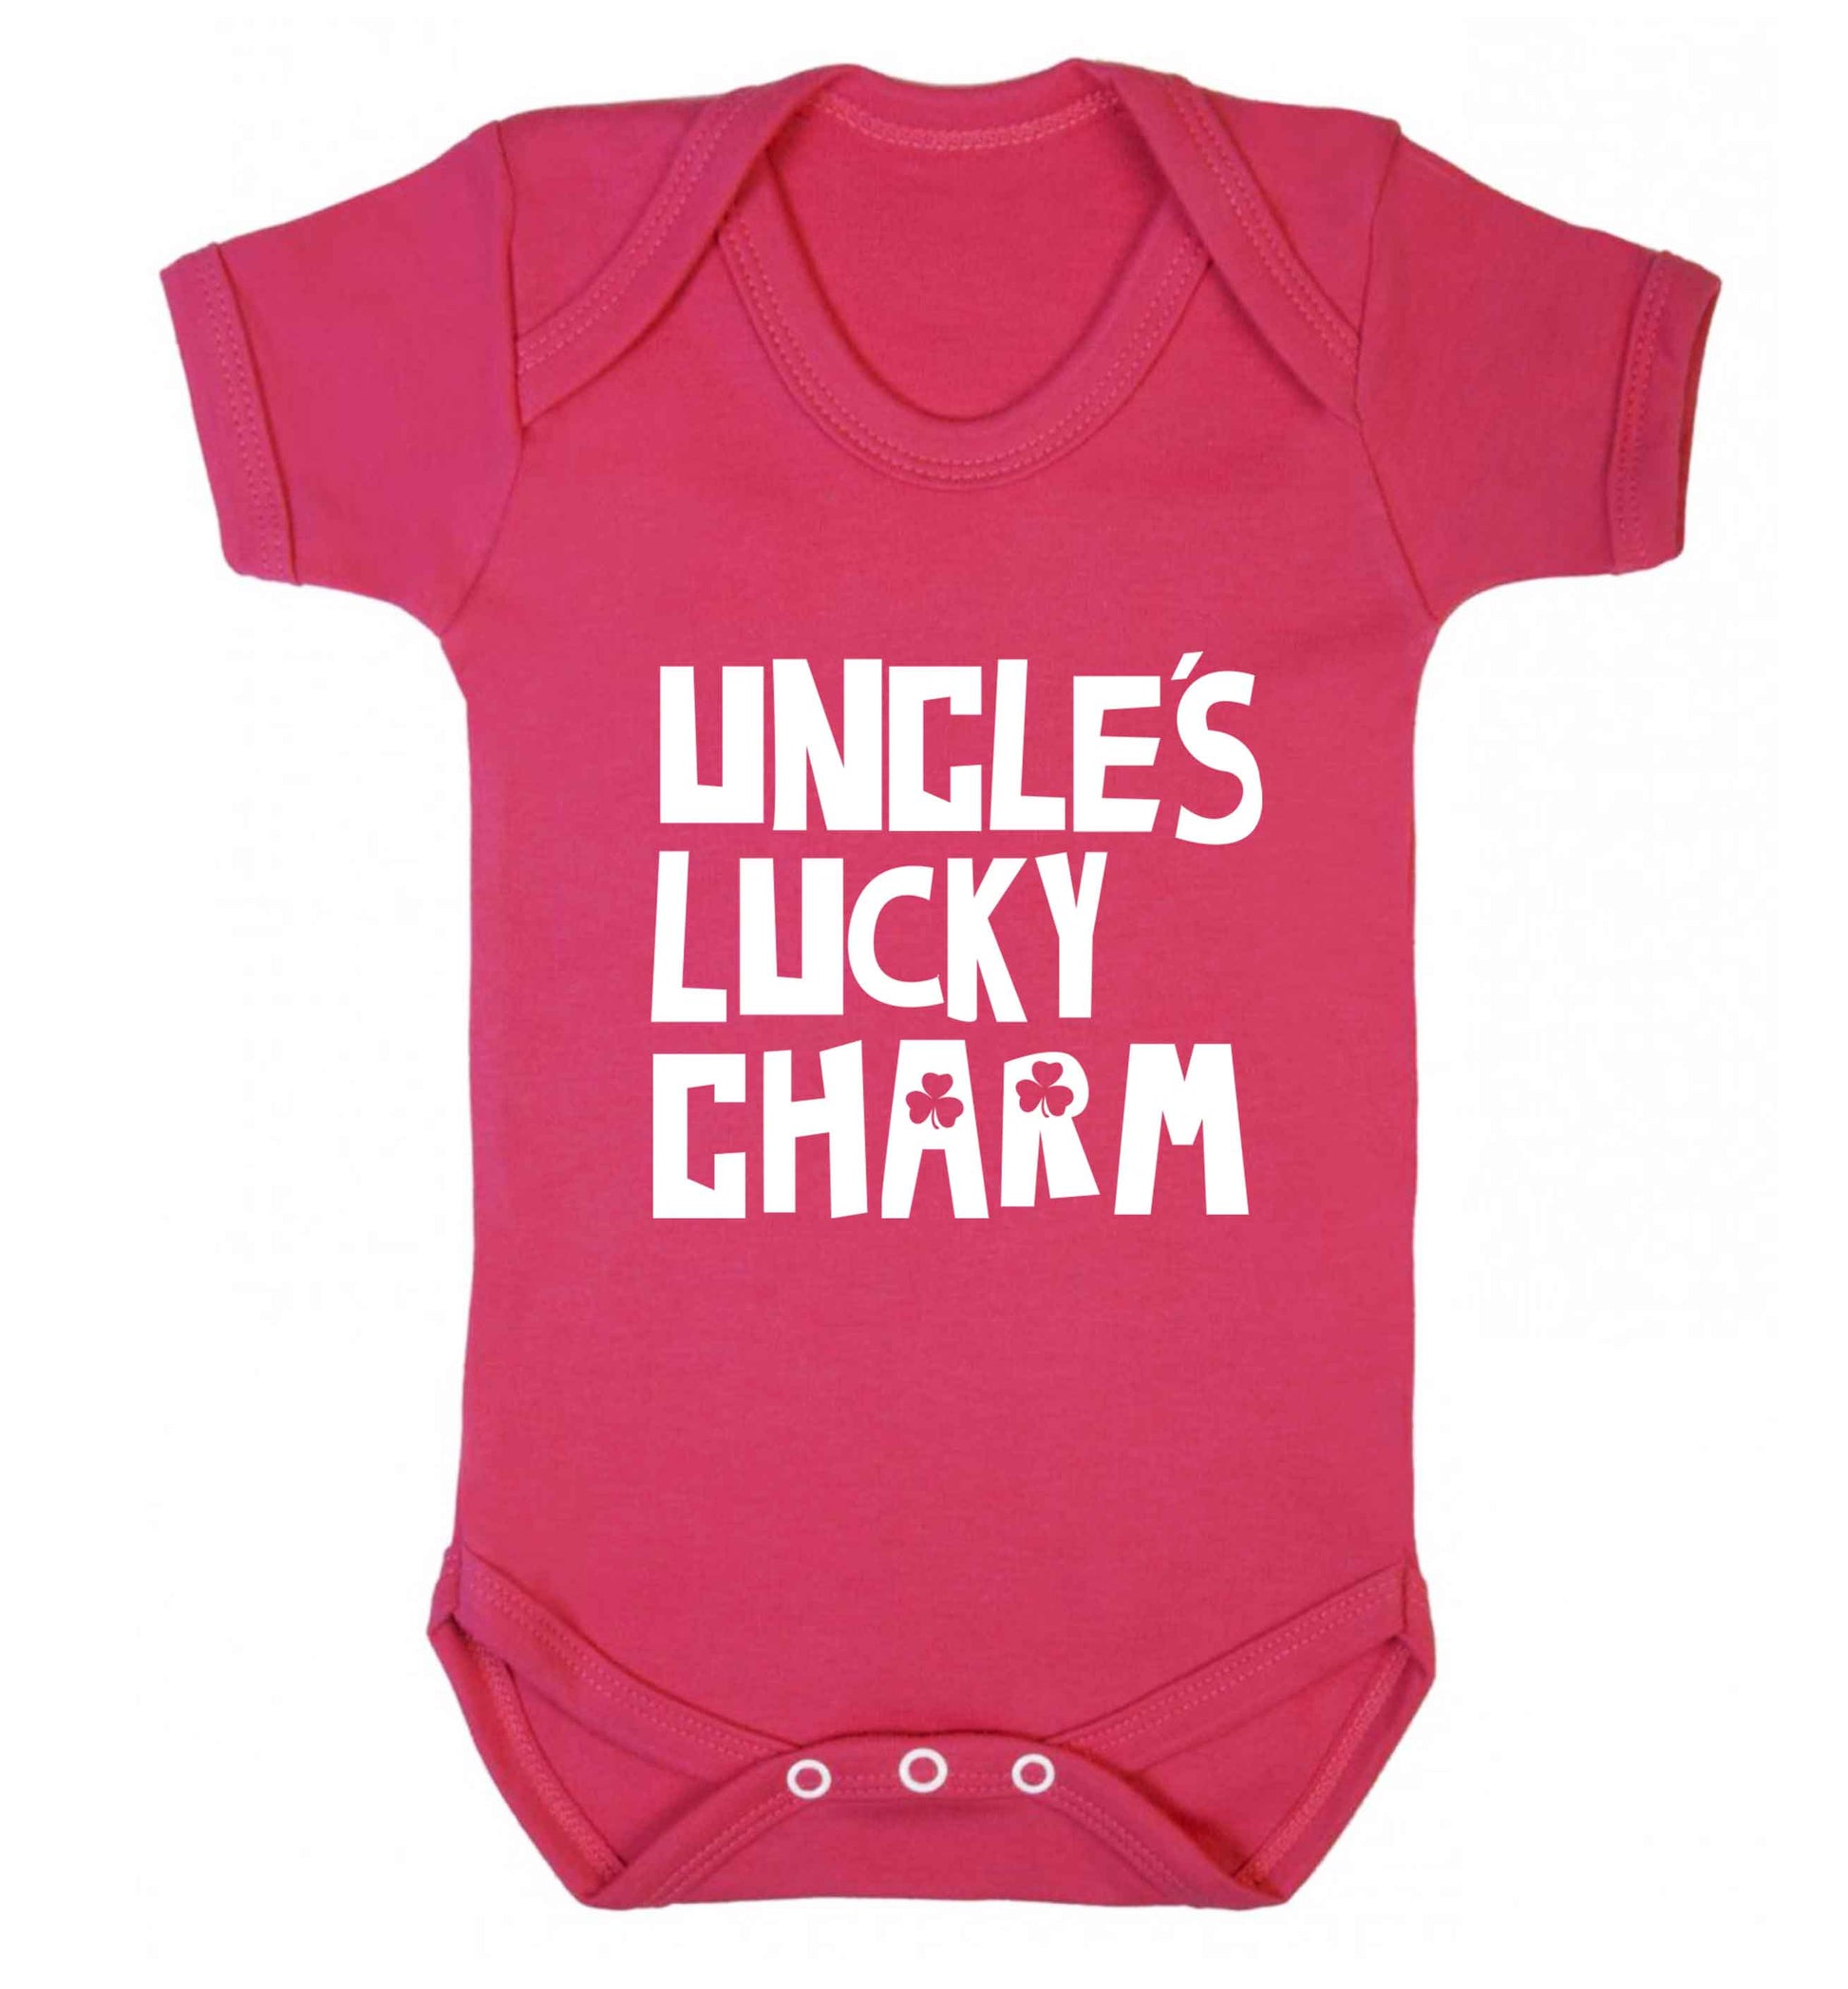 Uncles lucky charm baby vest dark pink 18-24 months